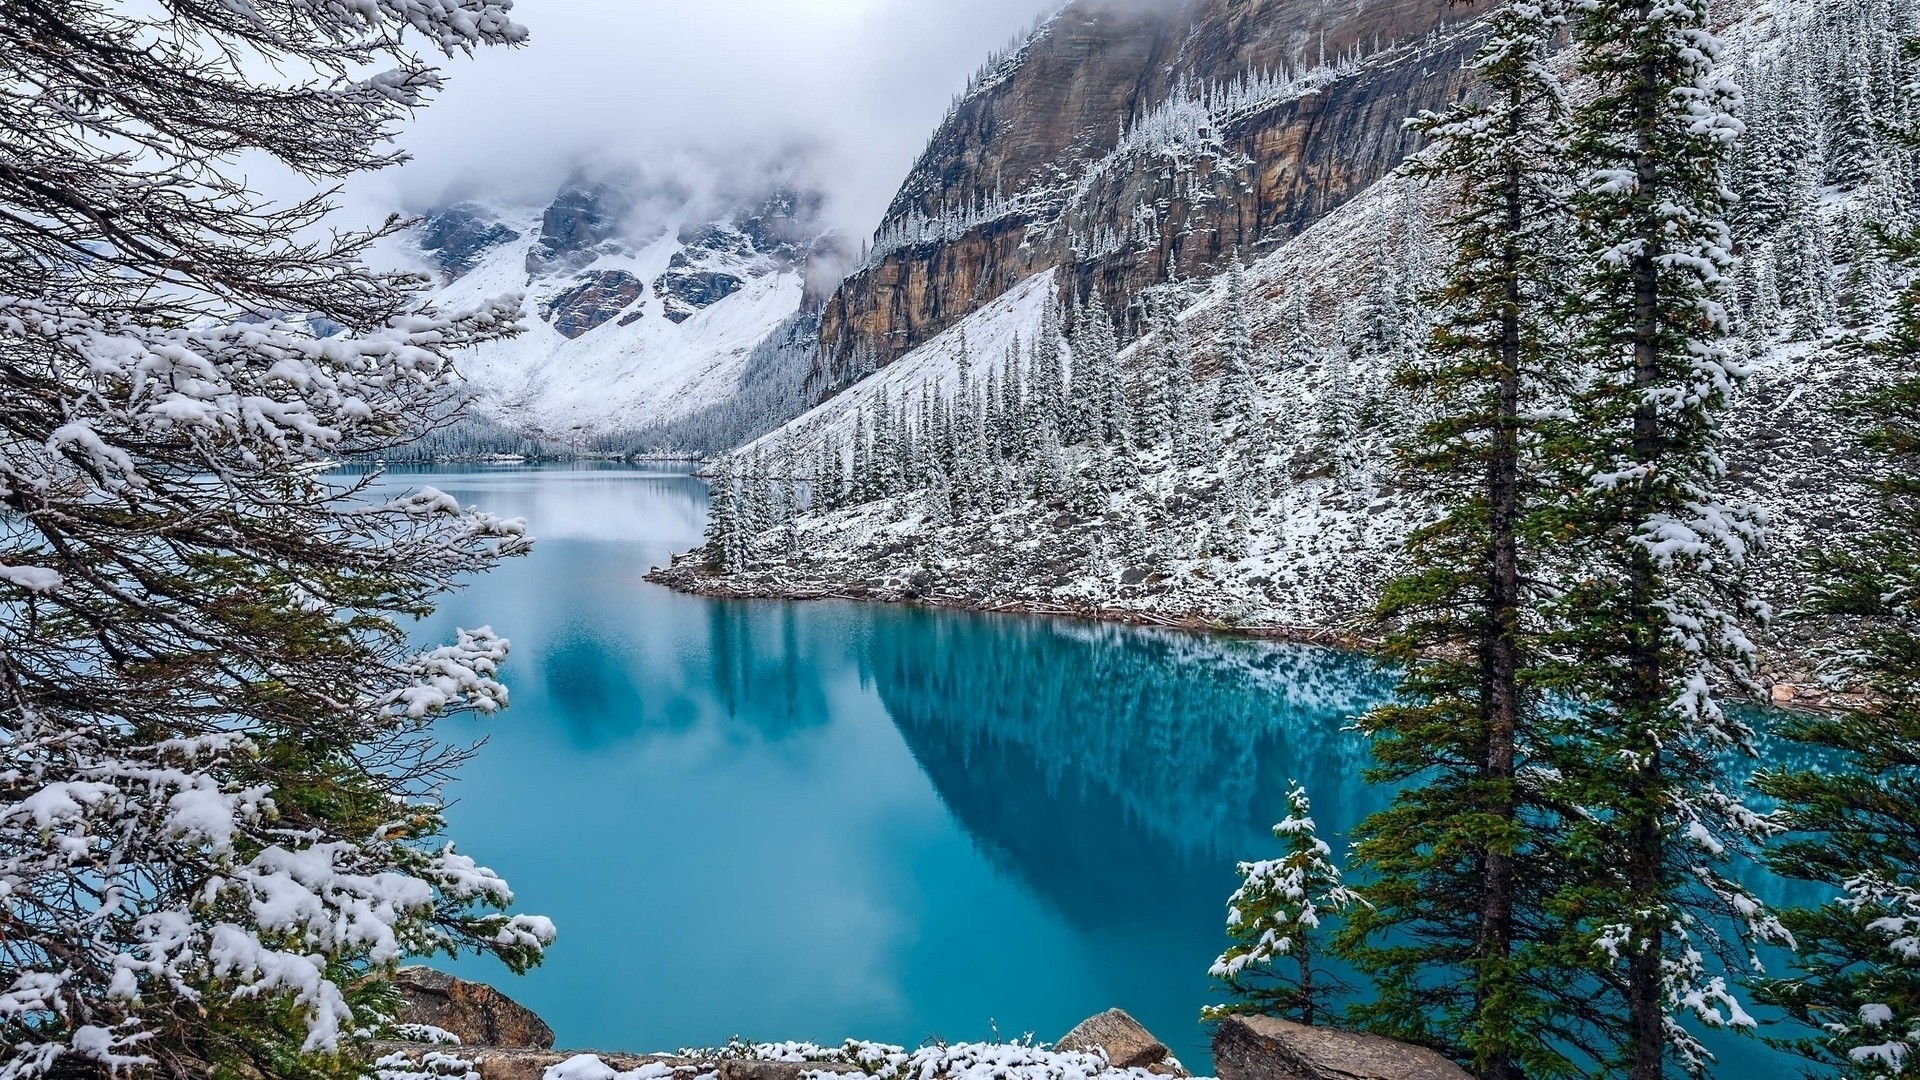 #turquoise, #snow, #Canada, #Moraine Lake, #trees, #water